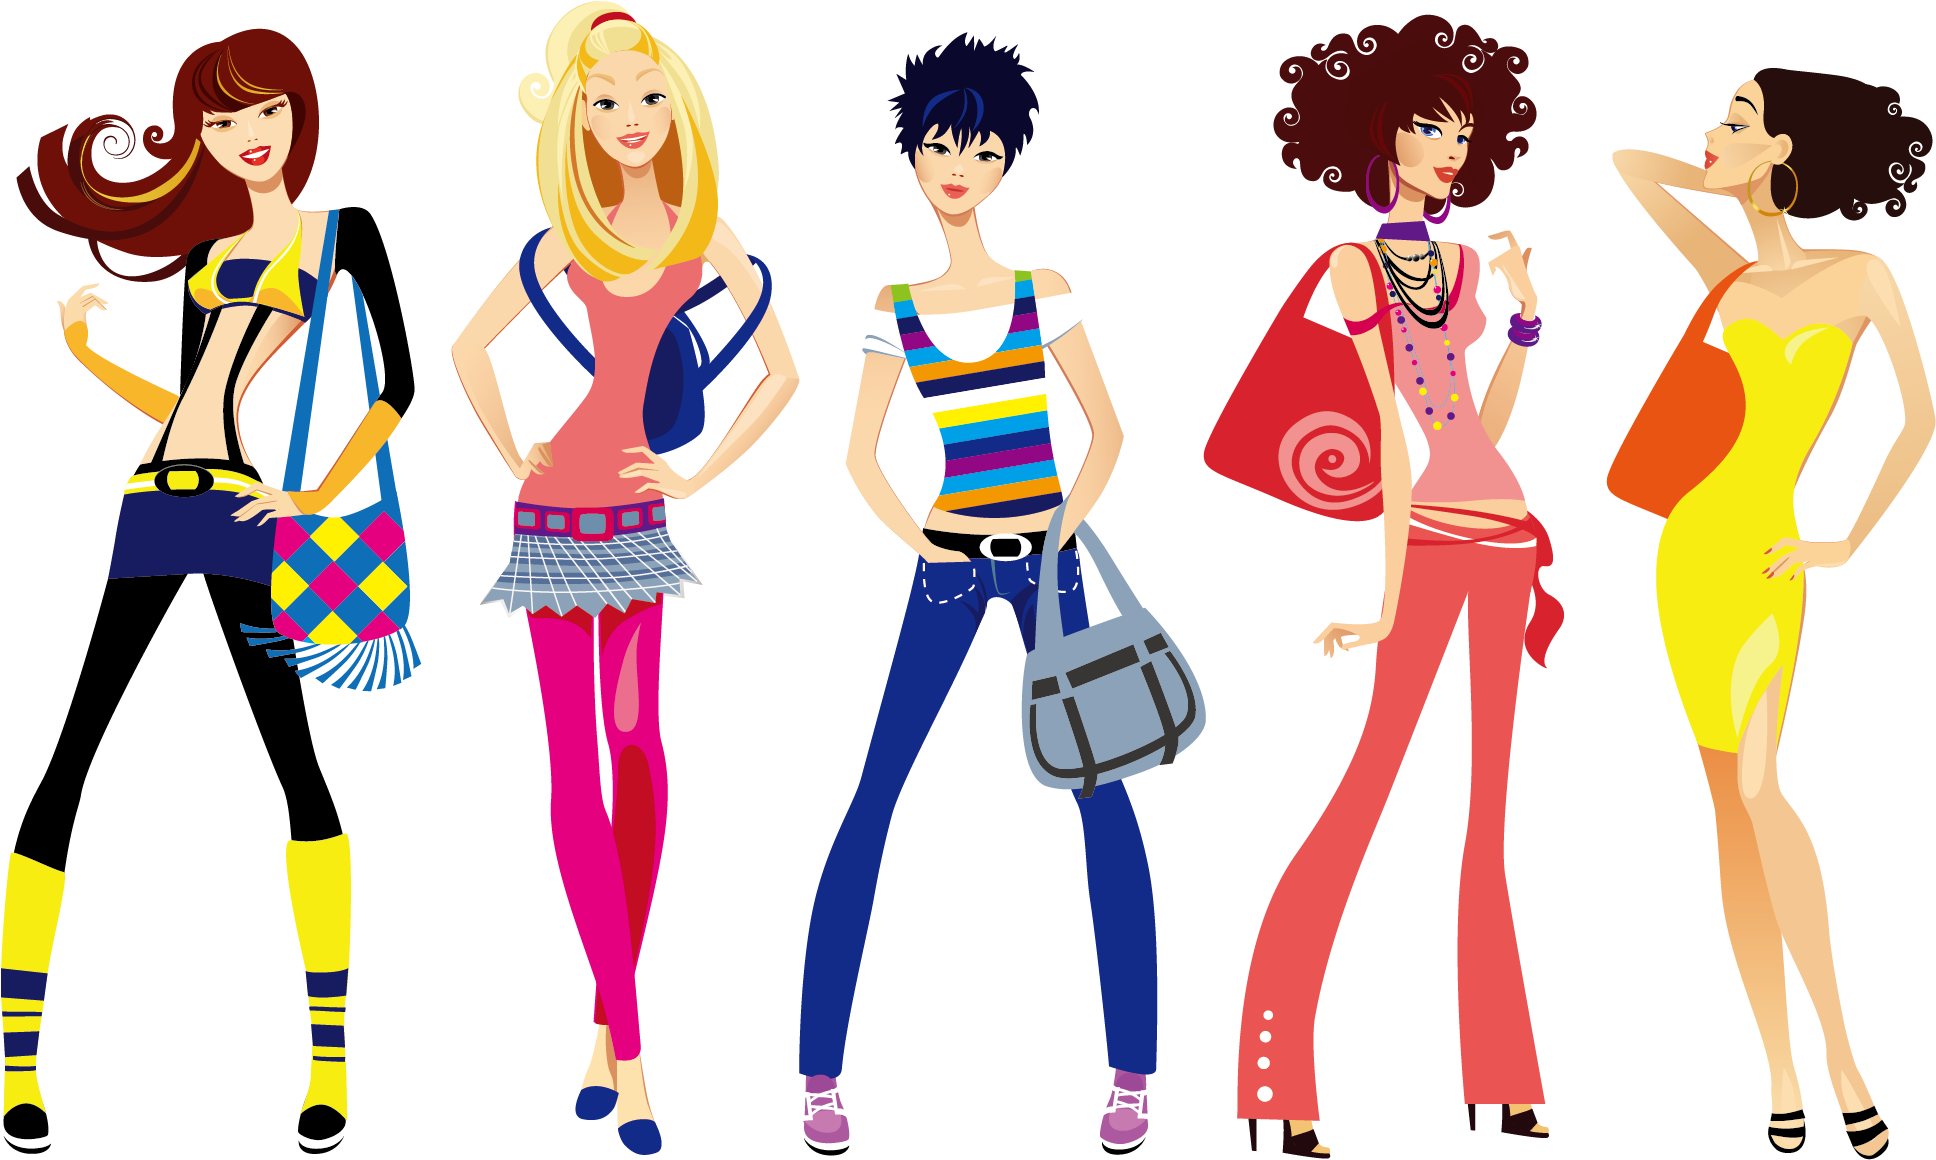 A Group Of Women In Different Outfits